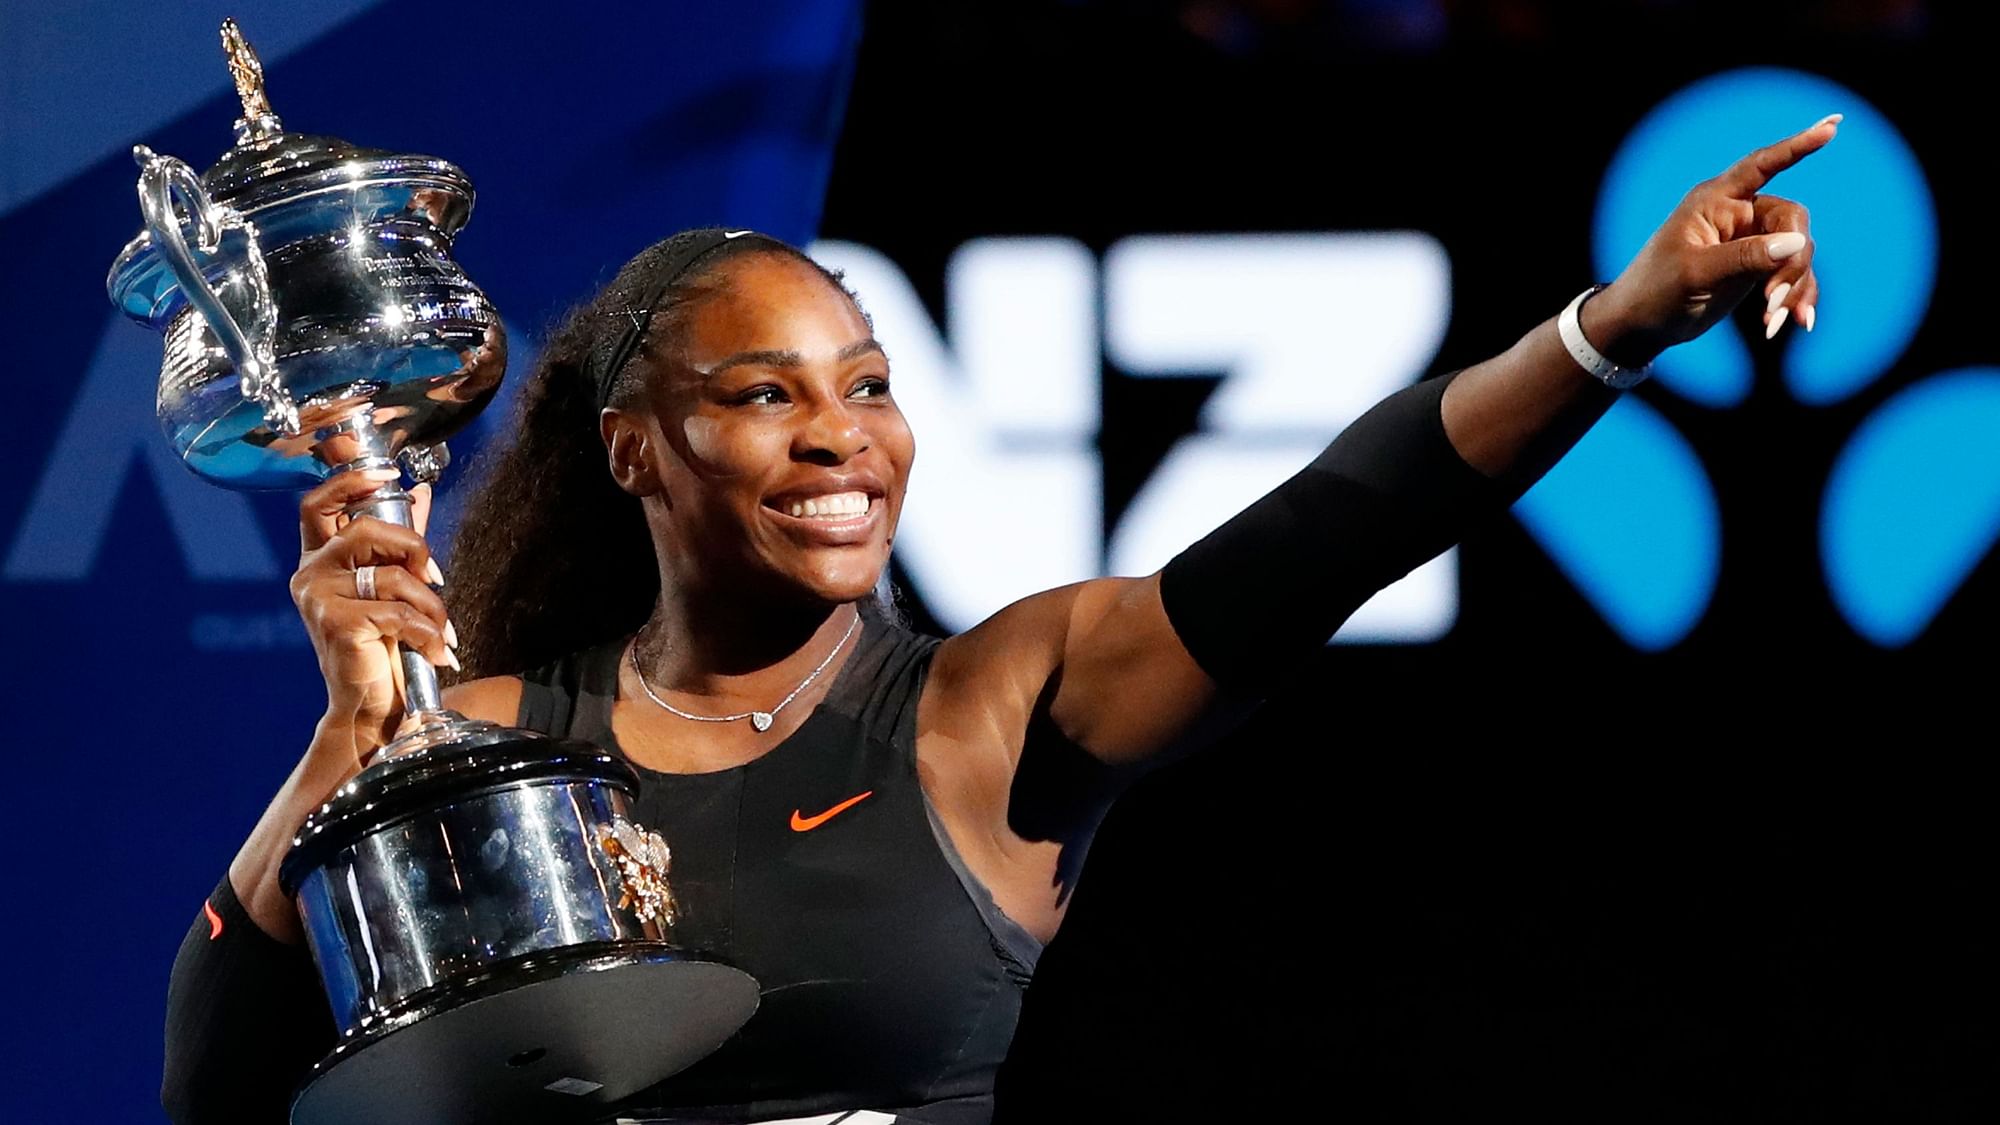 Serena Williams will be looking to win a record-equalling 24th Grand Slam at the 2019 Australian Open.